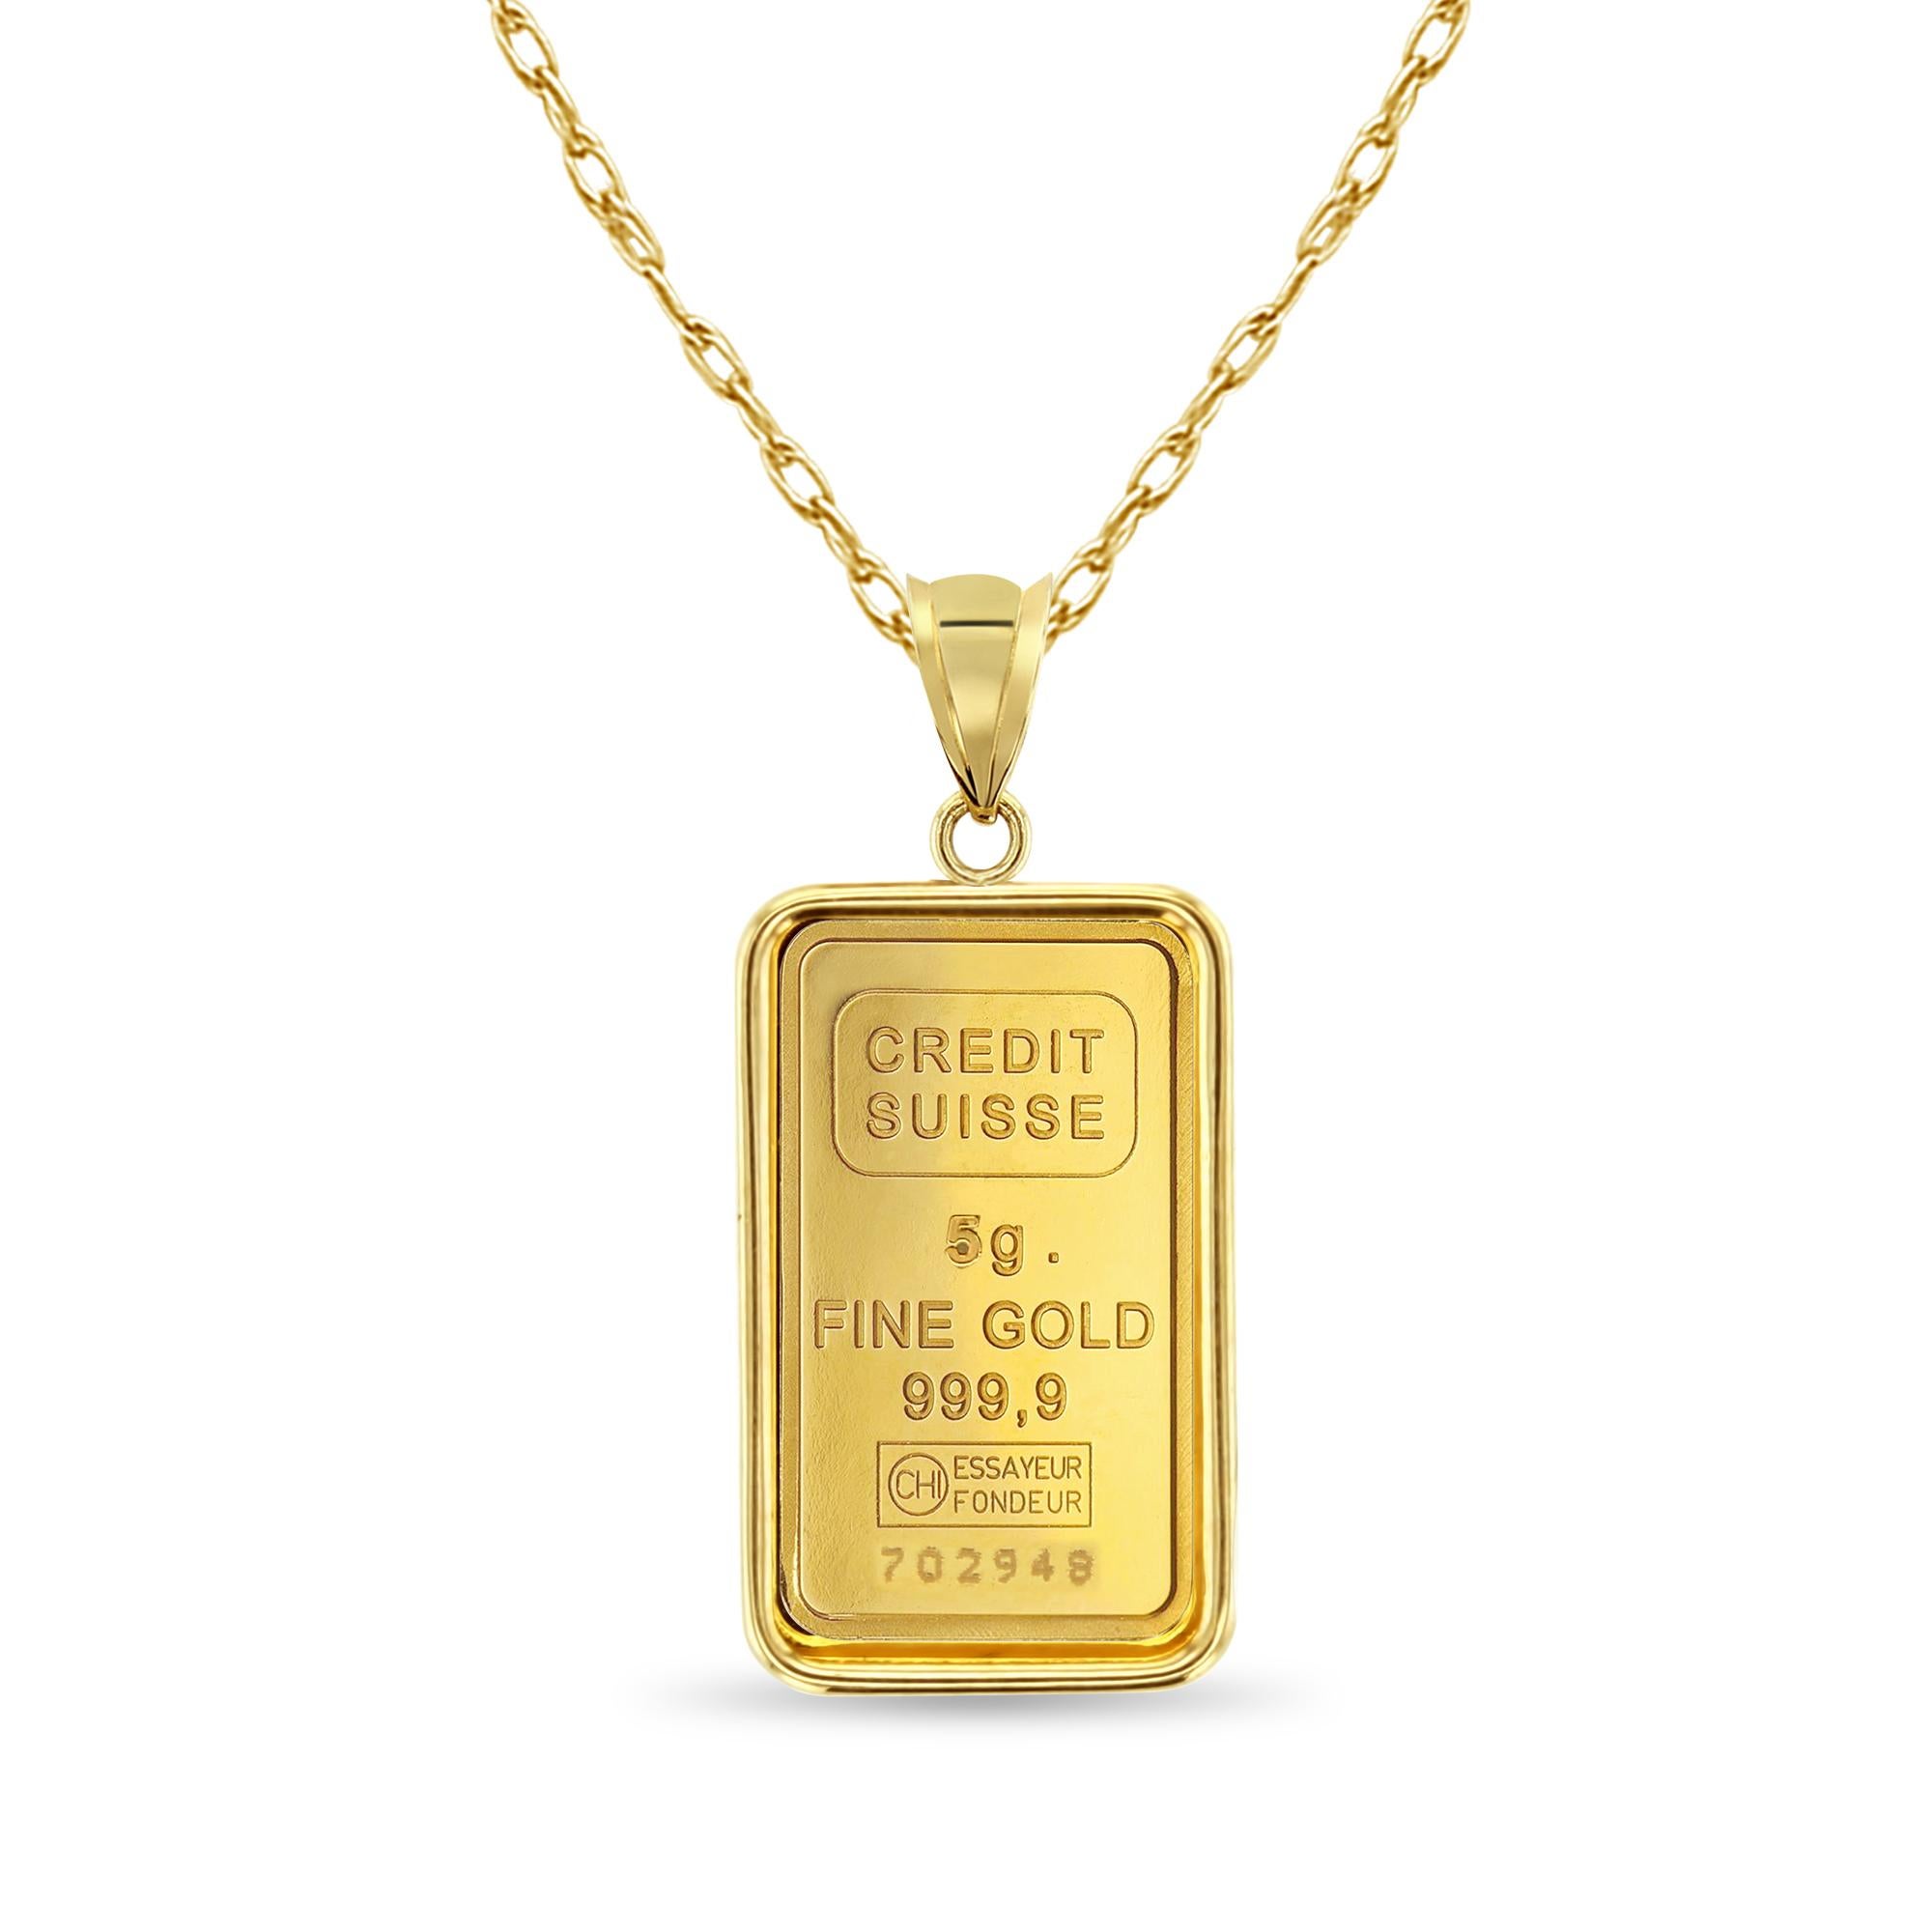 **MADE TO ORDER**

♥ Coin Information ♥
Country: Switzerland
Details: 5 Gram Credit Suisse Gold Bar
Purity: 999.9
Metal Weight: 0.1607 troy oz
Obverse: Credit Suisse logo, weight, metal content and purity
Reverse: Credit Suisse block logo

♥ Bezel